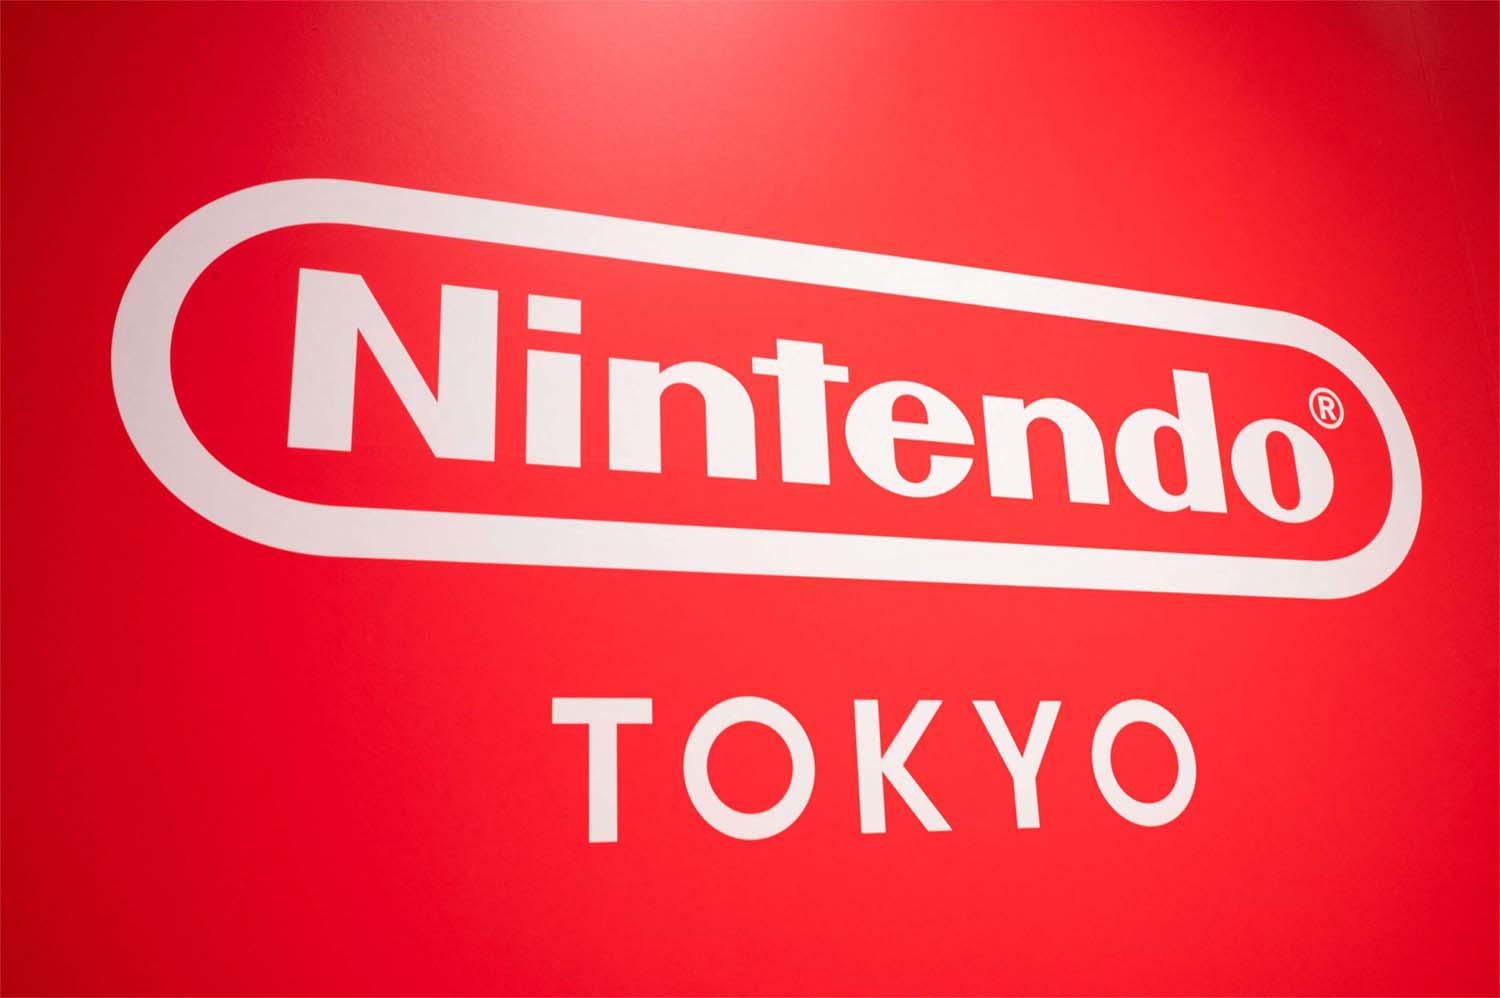 Saudi Arabia has been steadily building its stake over recent months in Nintendo